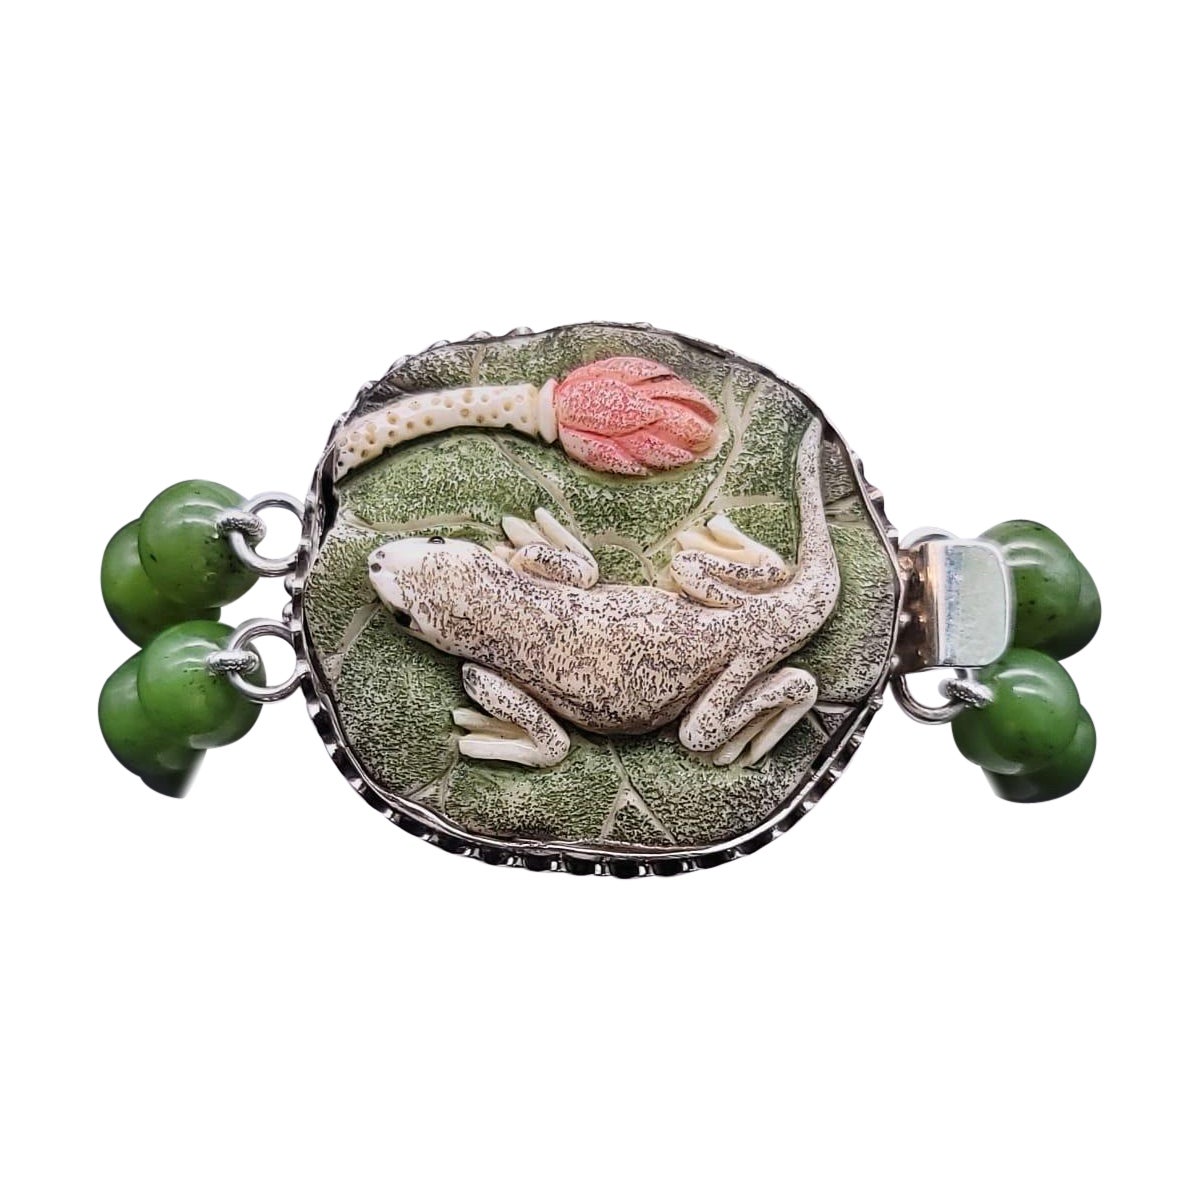 One-of-Kind

A 2-strand stunning jade bead (8m.m) bracelet with a dramatic clasp featuring a large carved, hand-tinted frog on a lotus leaf set in sterling silver, and the lovely rich jade is easy on the eye.

(It also has several symbolic meanings